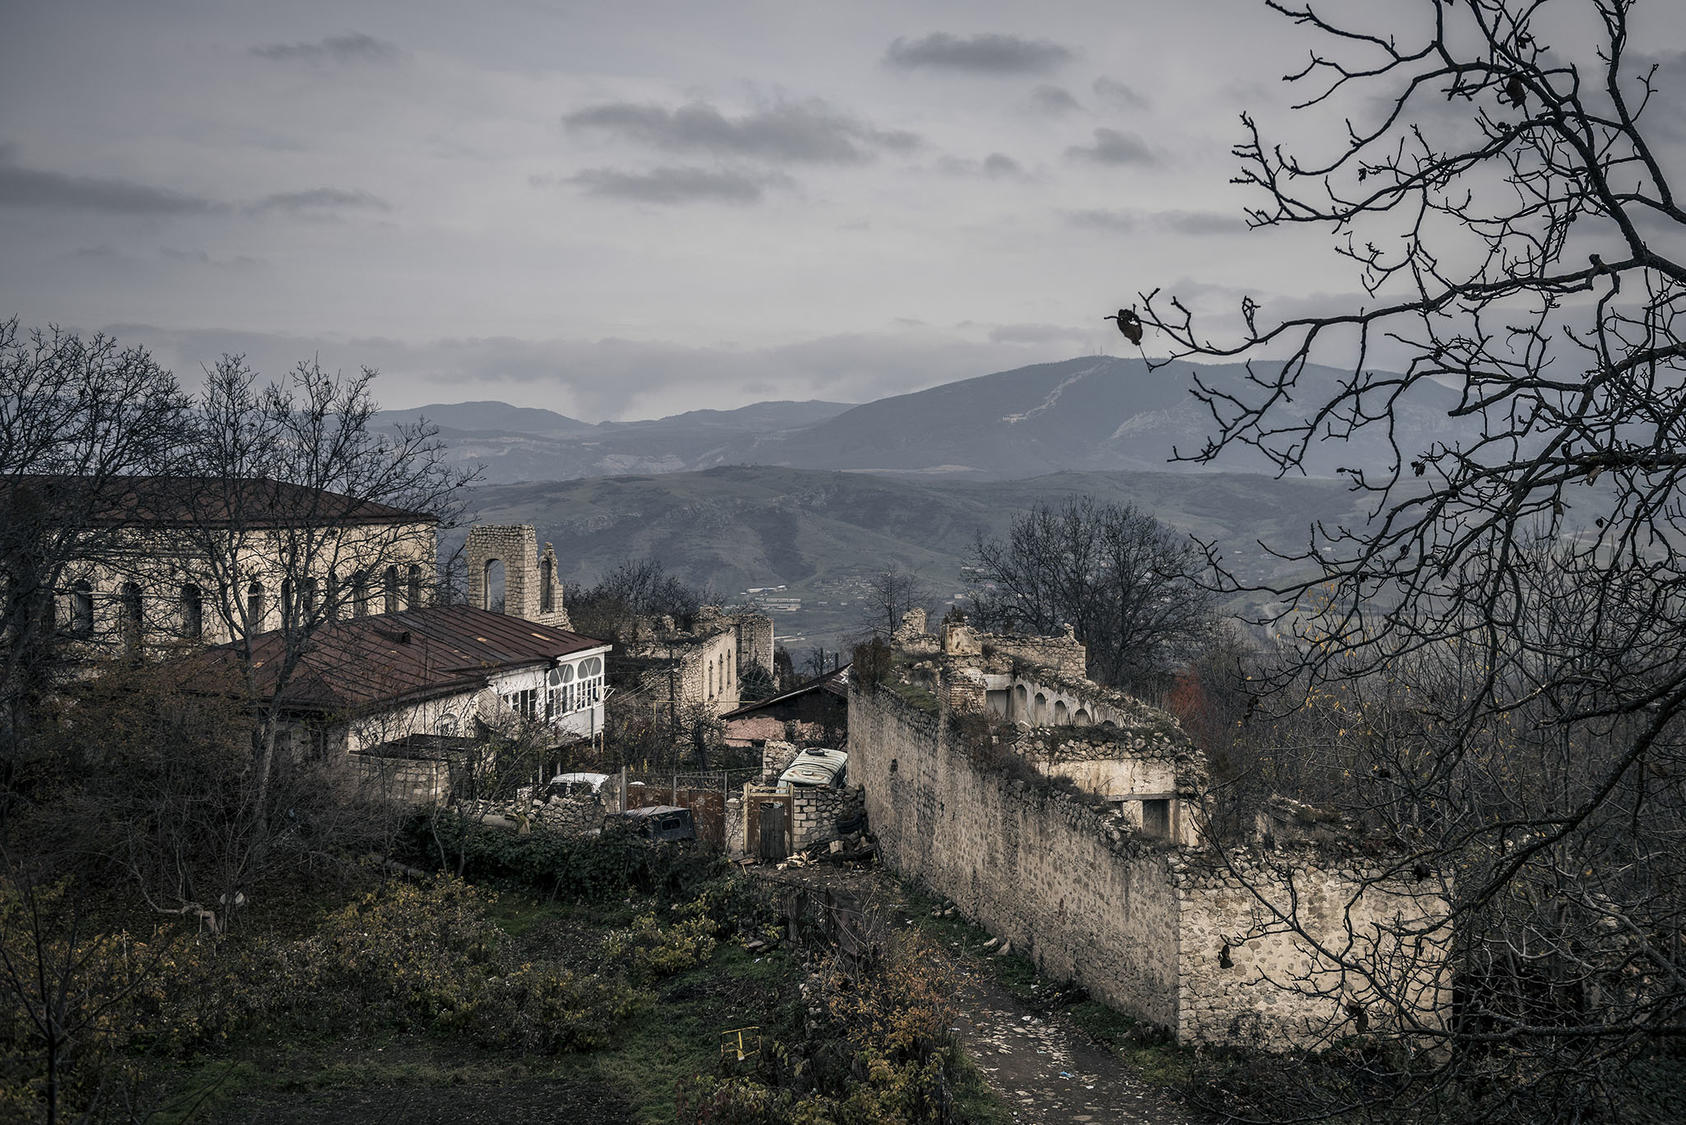 Ruined buildings stand in the Nagorno-Karabakh town of Shusha (called Shushi by Armenians) two decades after fighting forced Azerbaijanis there and elsewhere to flee. The resurgence of war now risks a wider conflict. (Sergey Ponomarev/The New York Times)